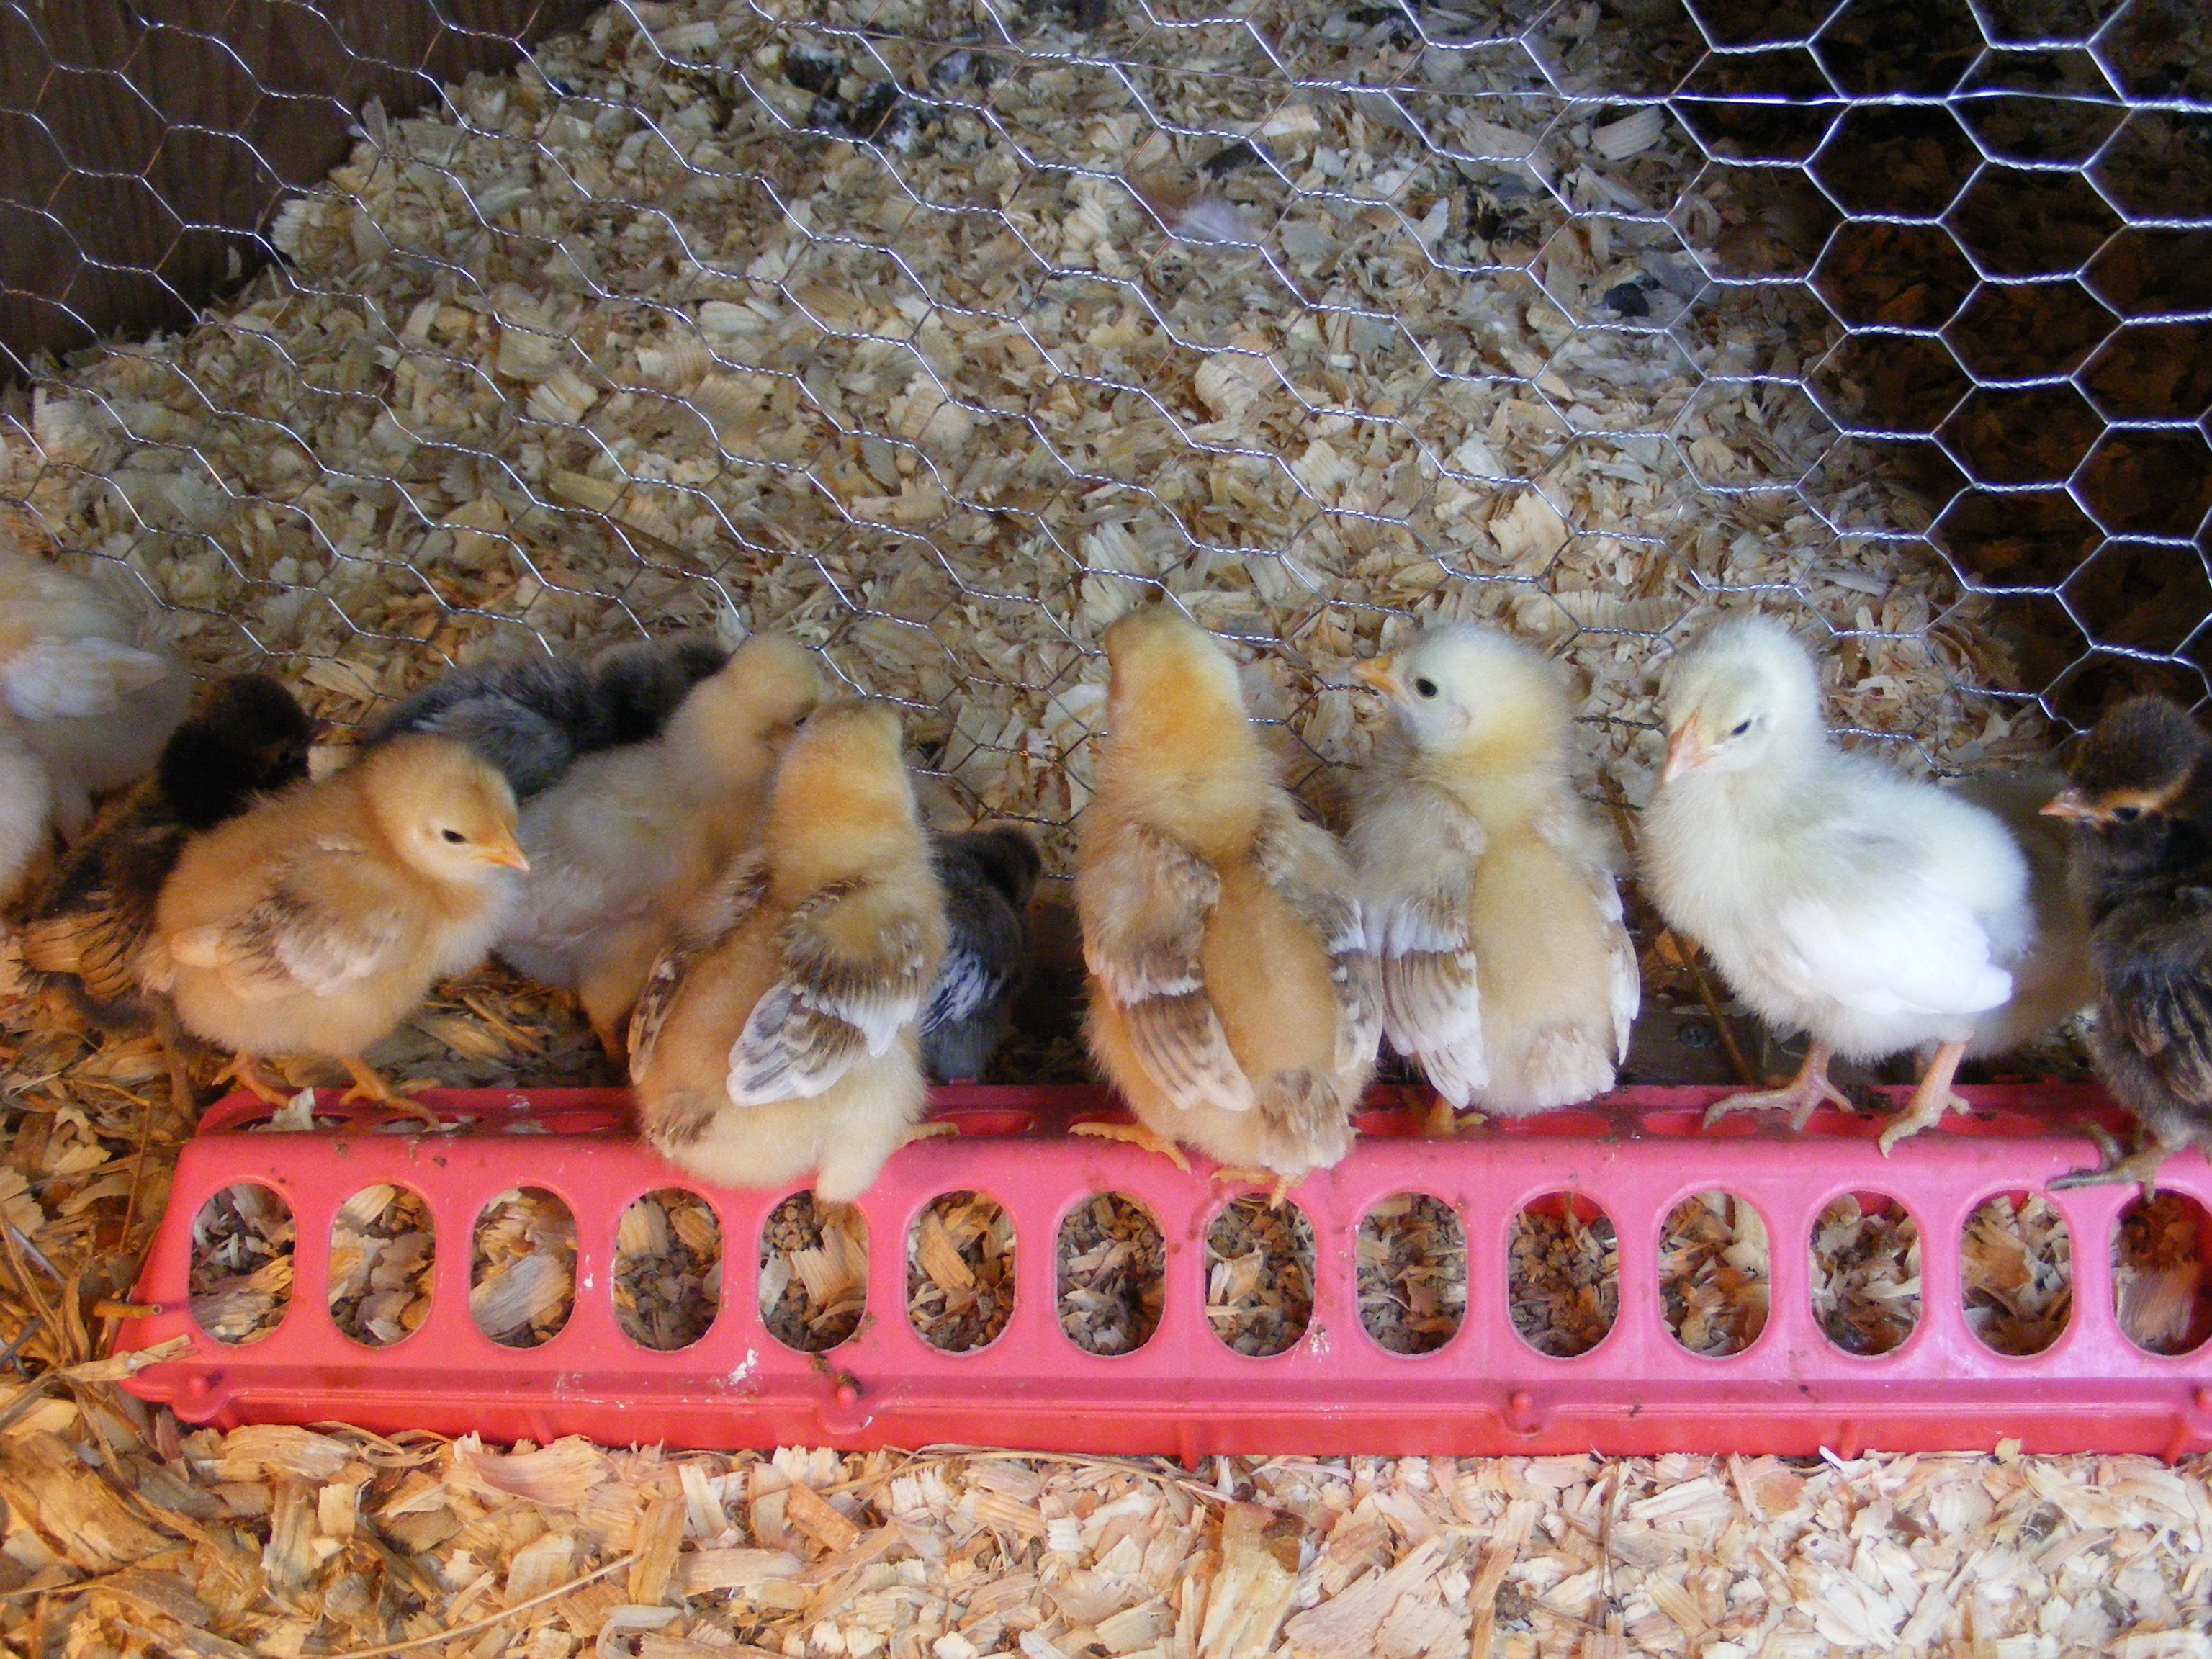 New chicks getting used to their new home.